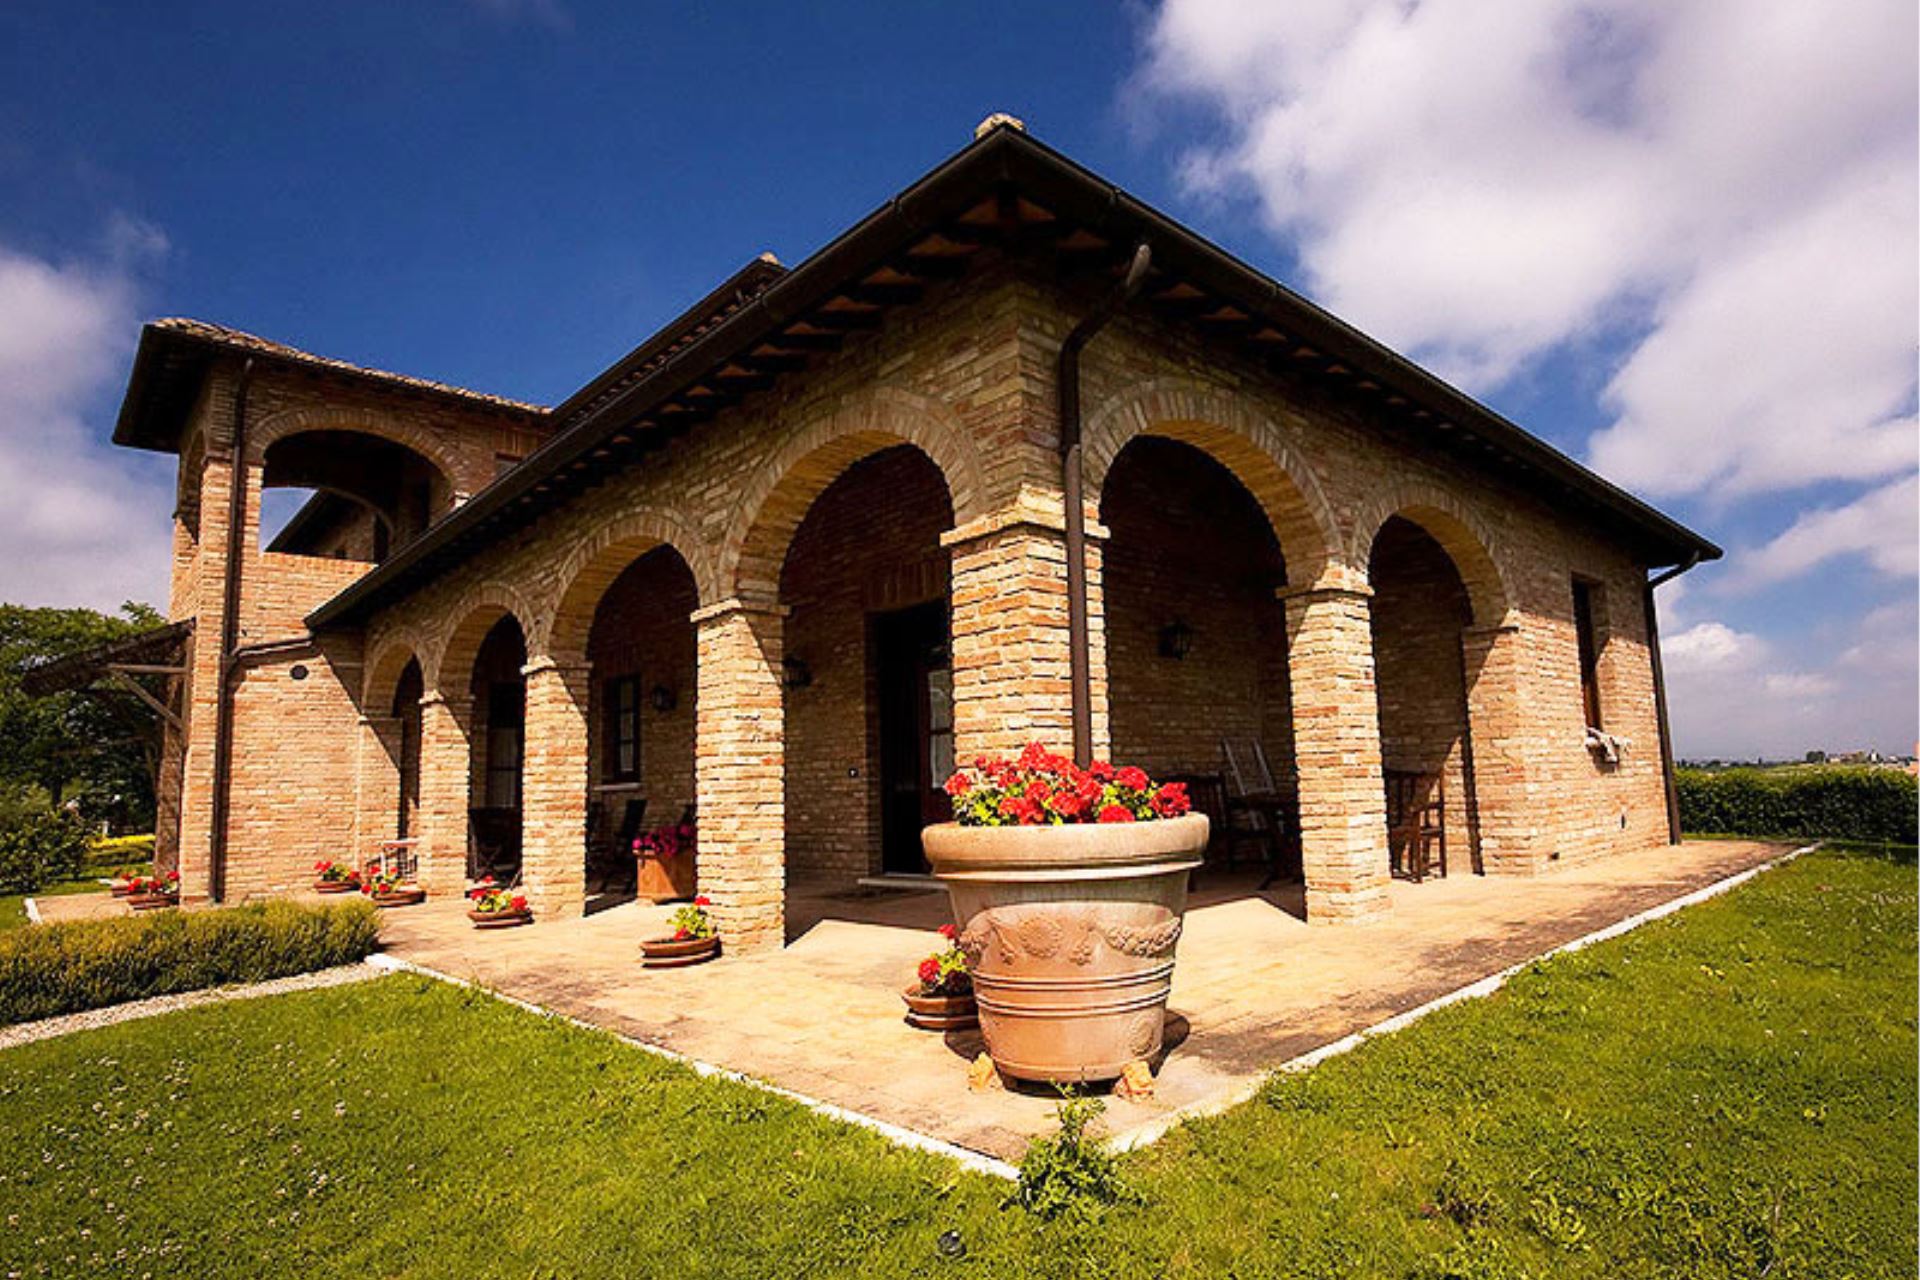 APARTMENTS WITH POOL NOBILE MONTEPULCIANO TOSCANA